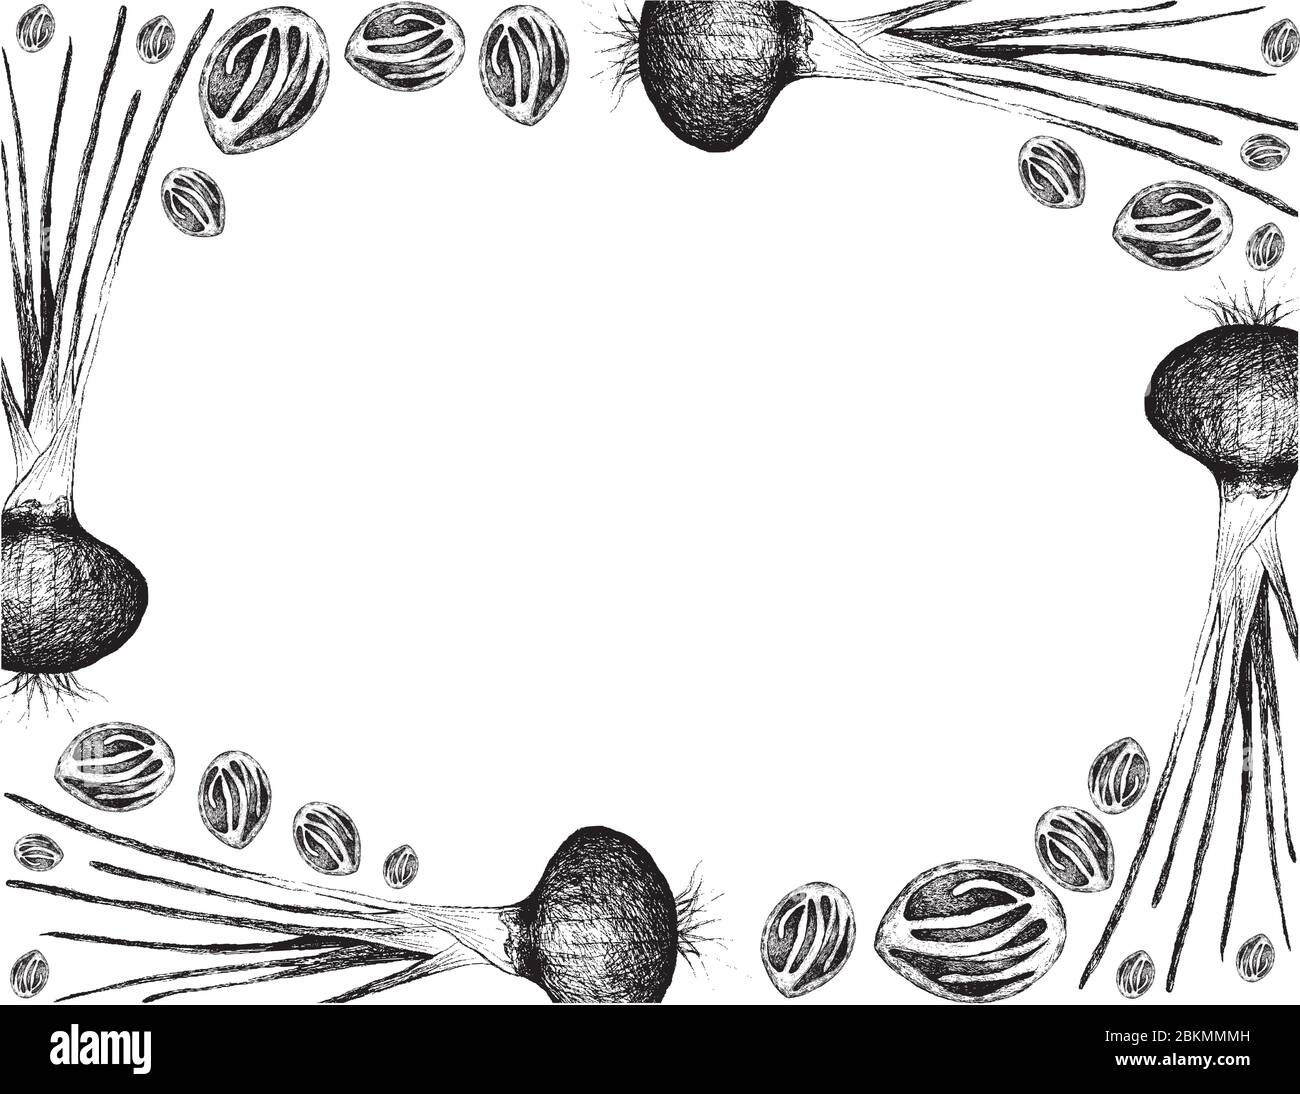 Herbal Plants, Hand Drawn Illustration Frame of Fresh Nutmeg or Myristica Fragrans Fruits with Shallots, Spanish Onions, or Red Onions, Used for Seaso Stock Vector